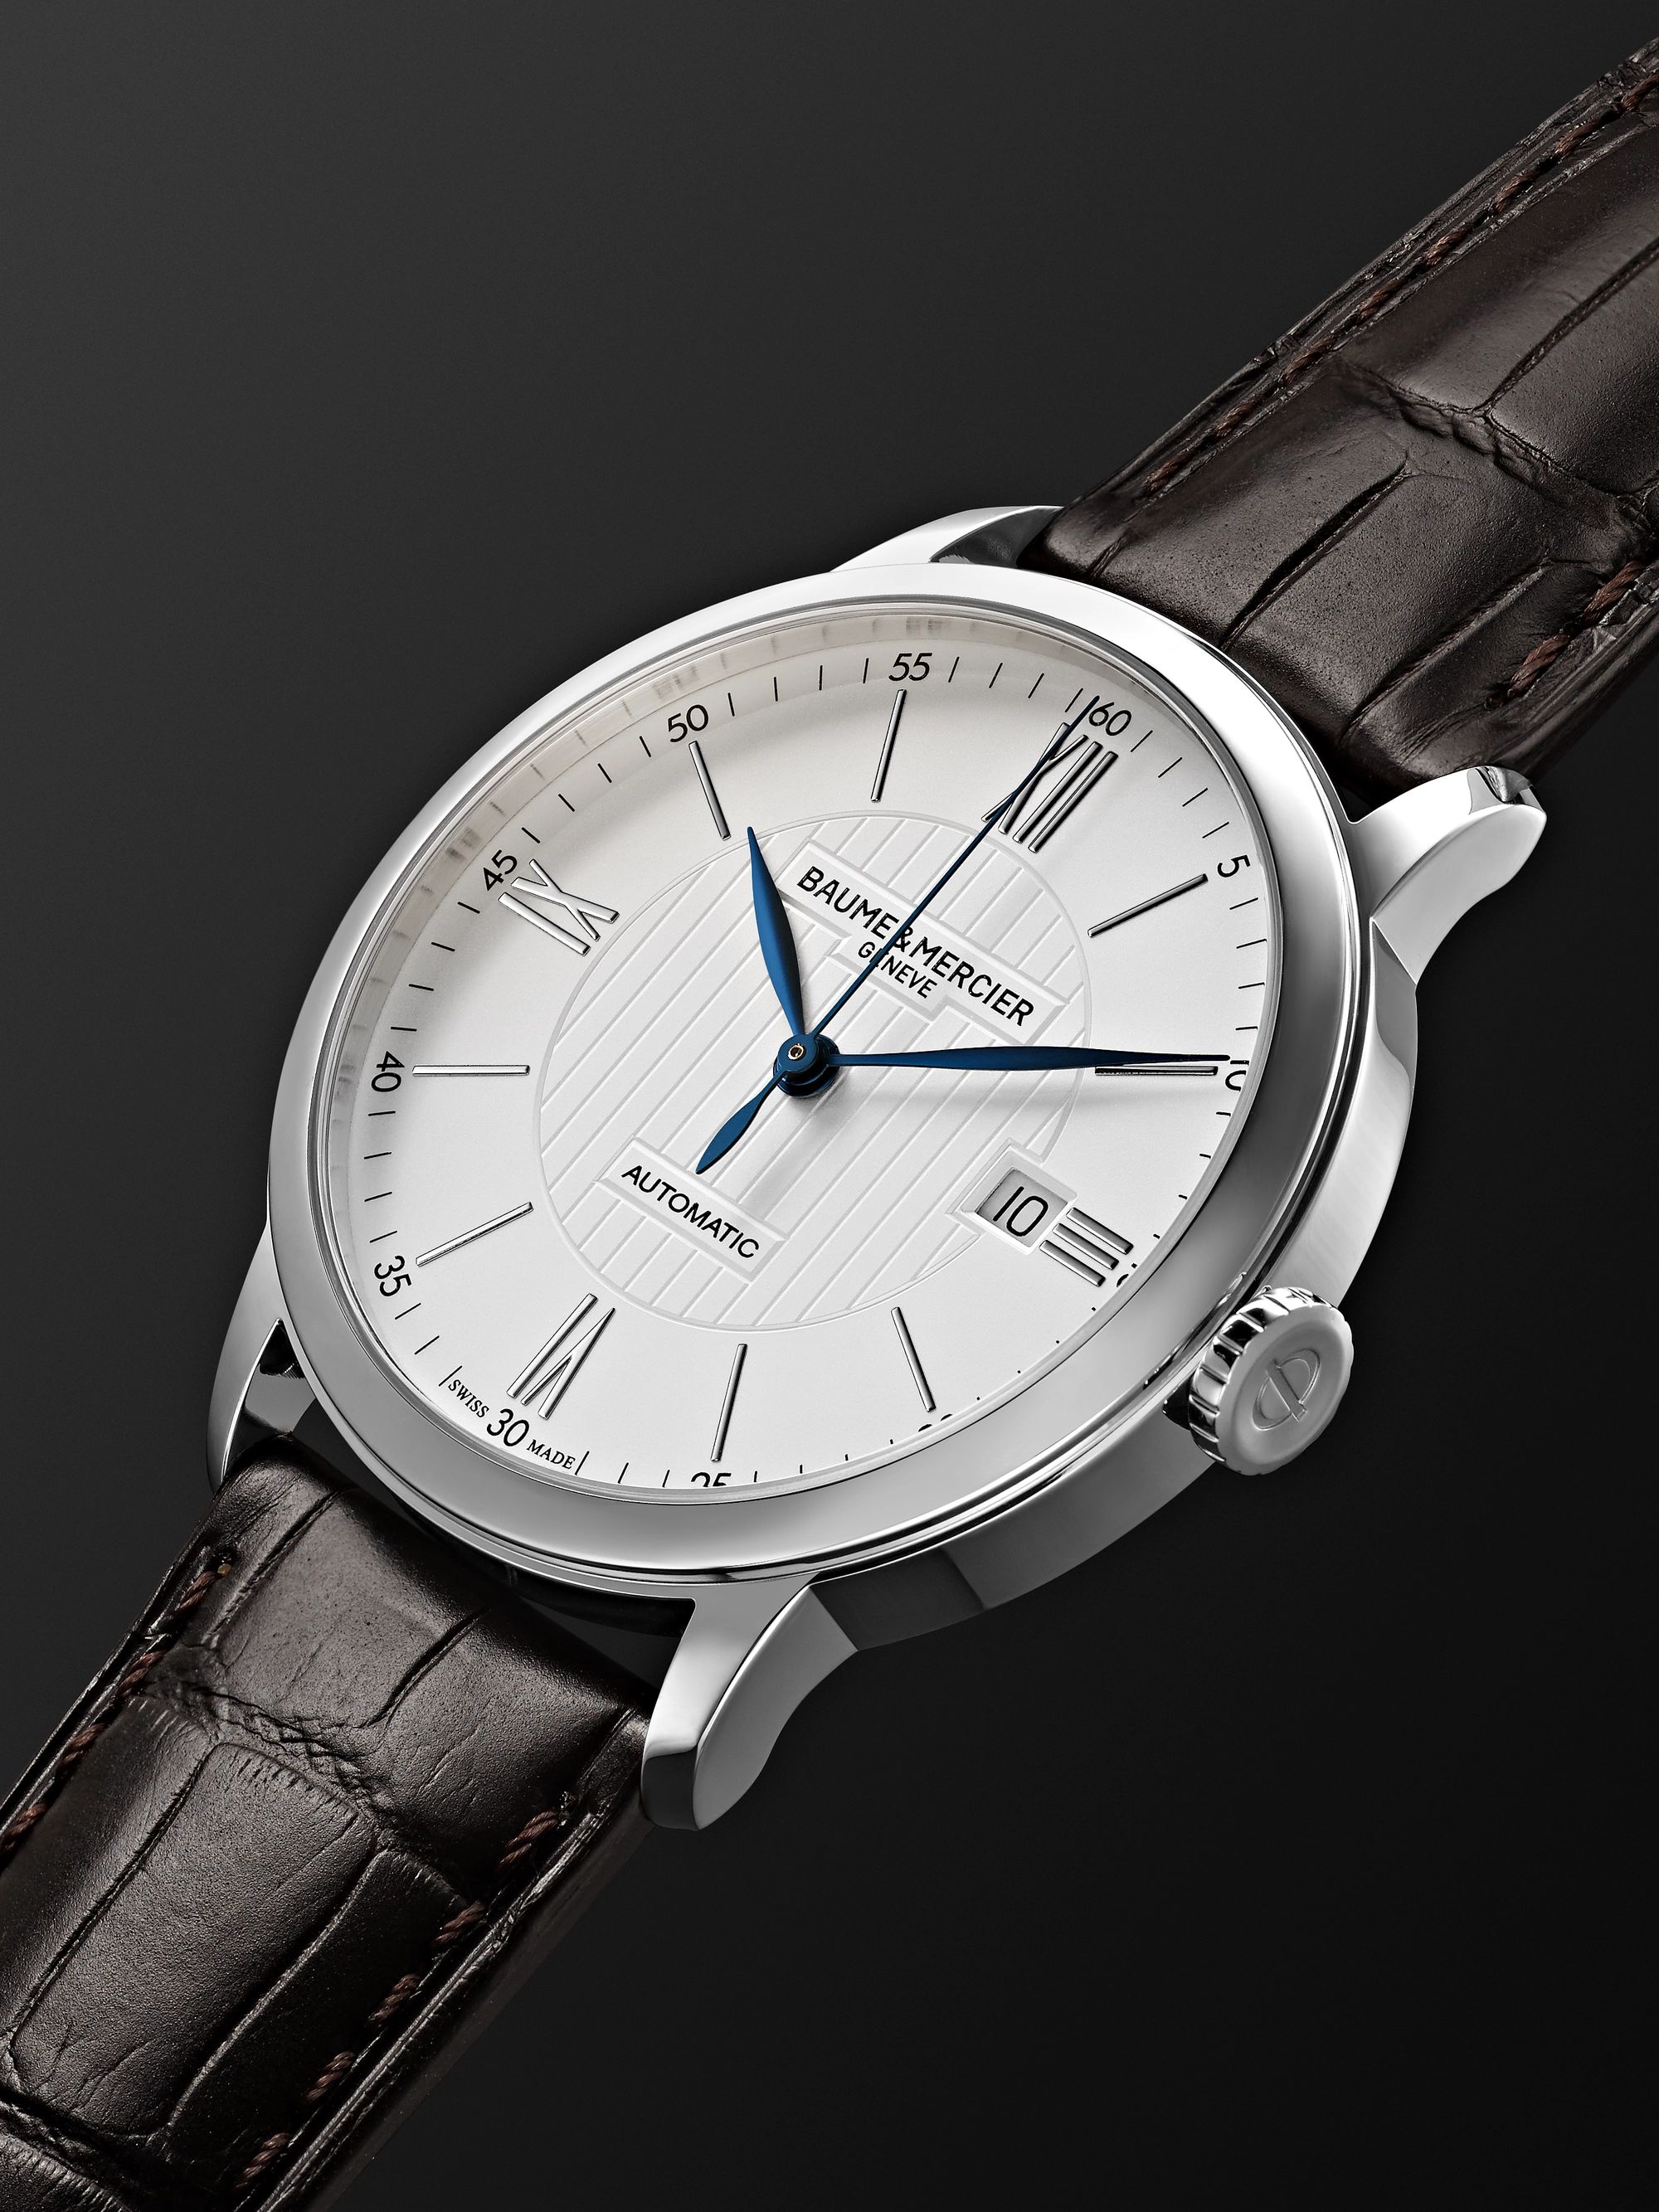 BAUME & MERCIER Classima Automatic 40mm Stainless Steel and Alligator Watch, Ref. No. 10214